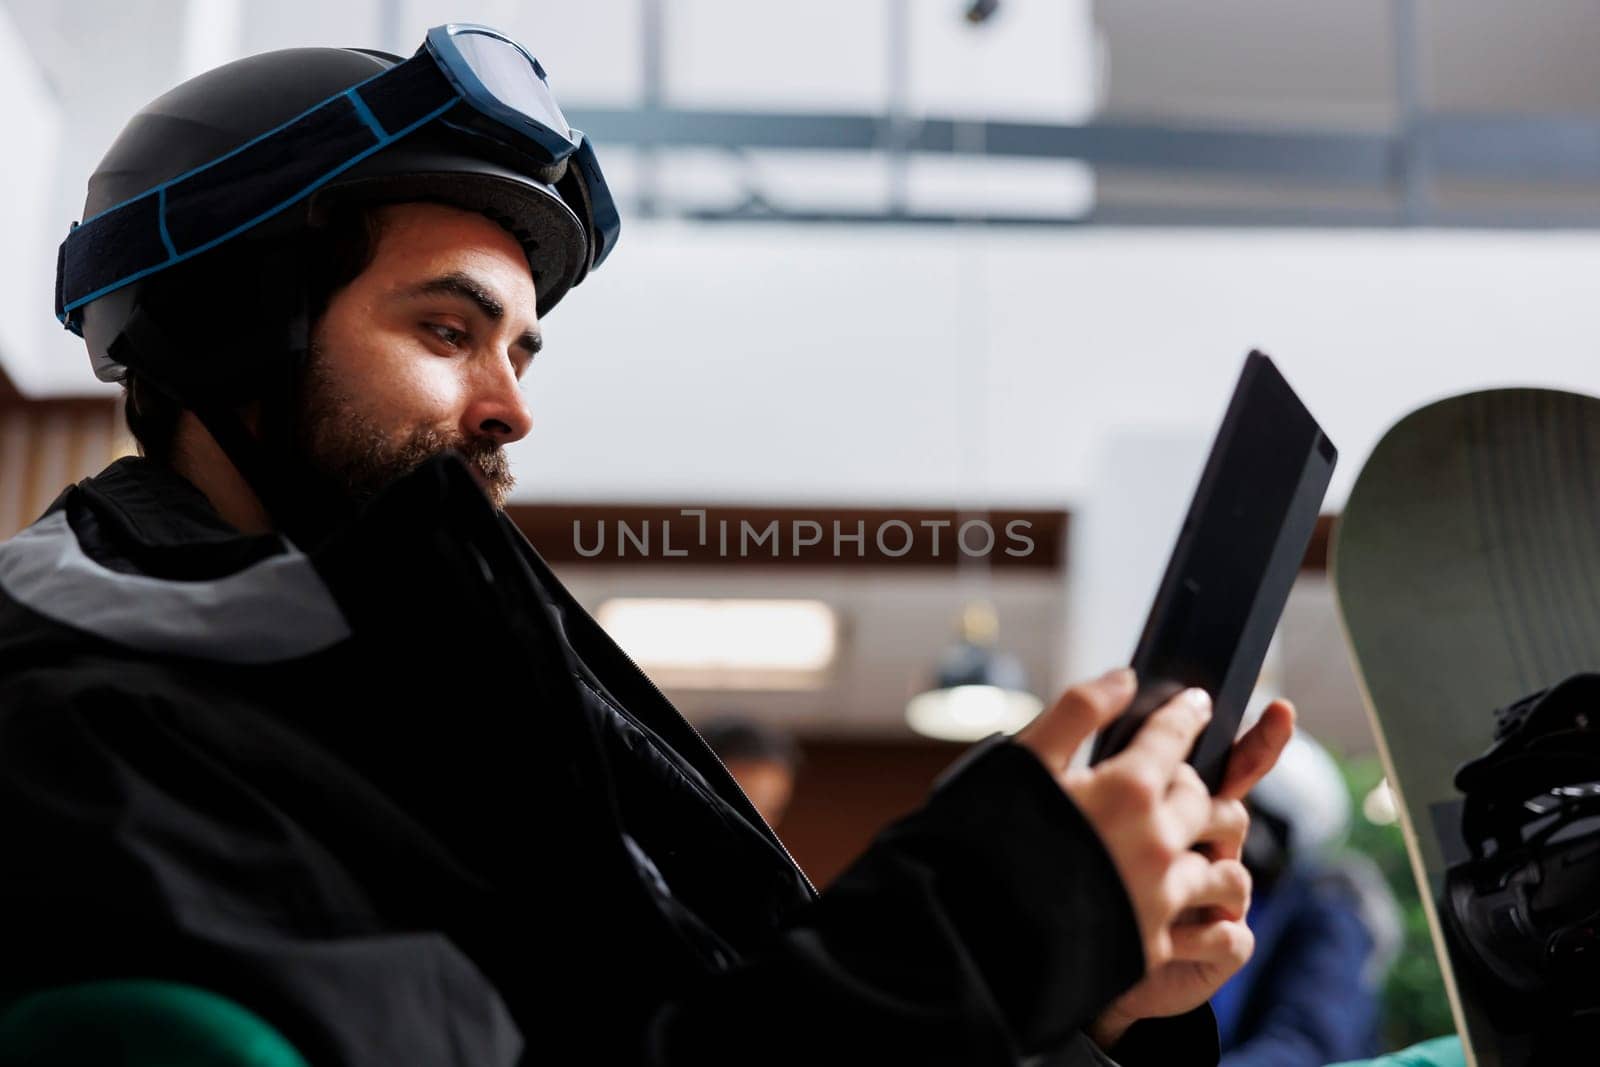 Close-up view of young man dressed in winter jacket browsing the internet on a digital device. Image showing male traveler with snowboarding gear engrossed in his tablet searching for snowy slopes.